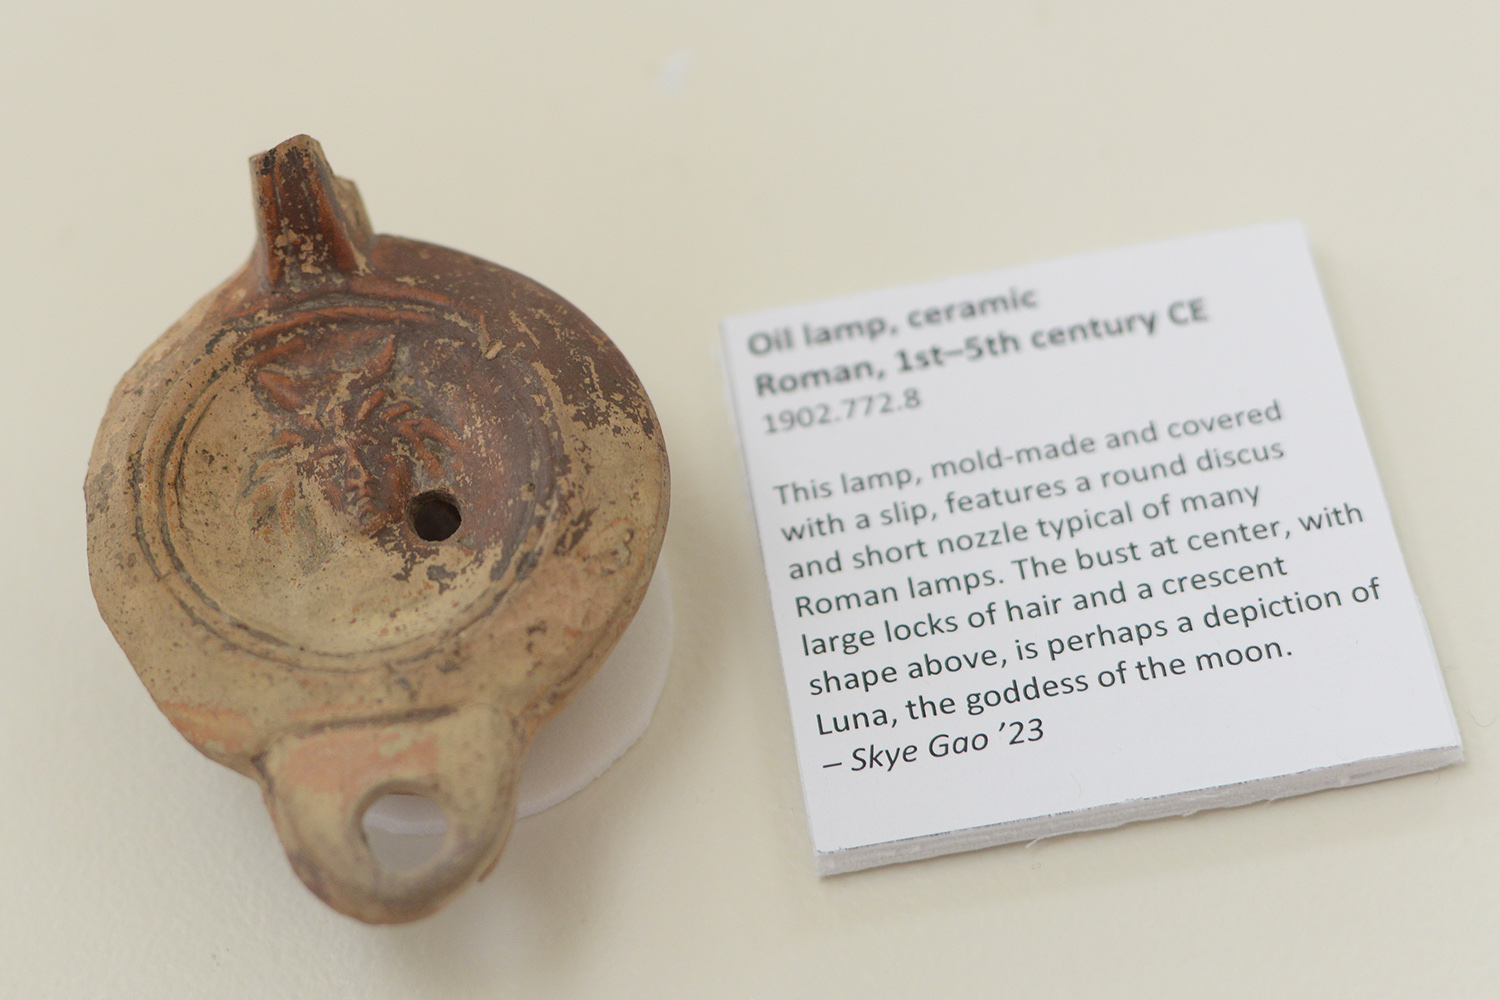 Skye Gao ’23 studied this ceramic, close-shaped Roman lamp from the 1st-5th century CE. 